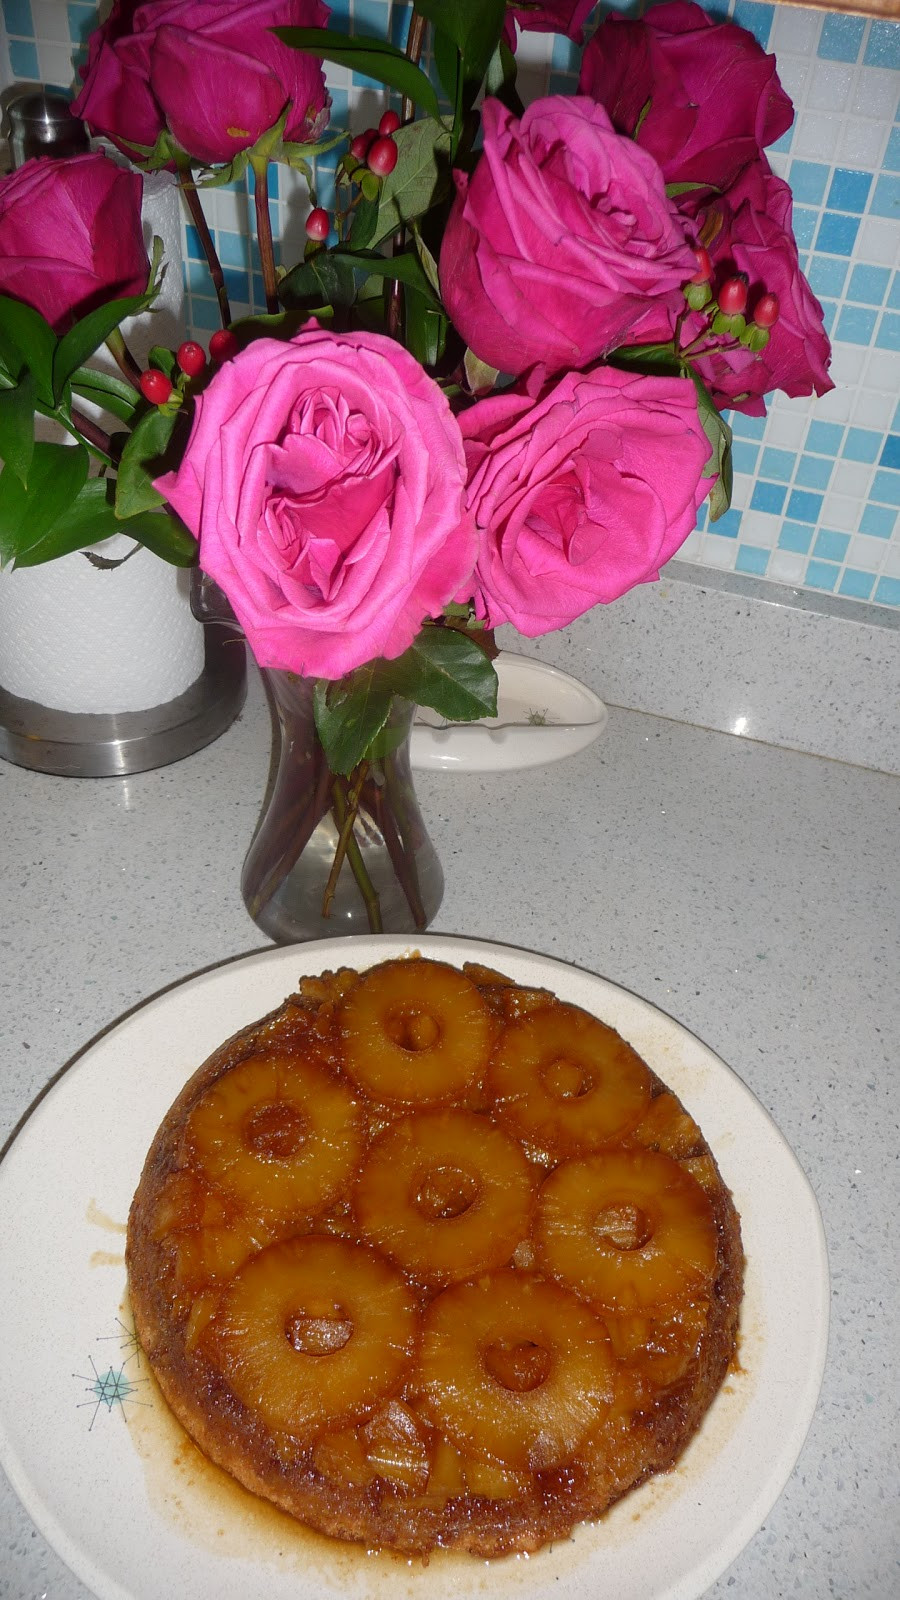 Pineapple Upside Down Cake From Scratch
 JensWare Pineapple Upside Down Cake from SCRATCH